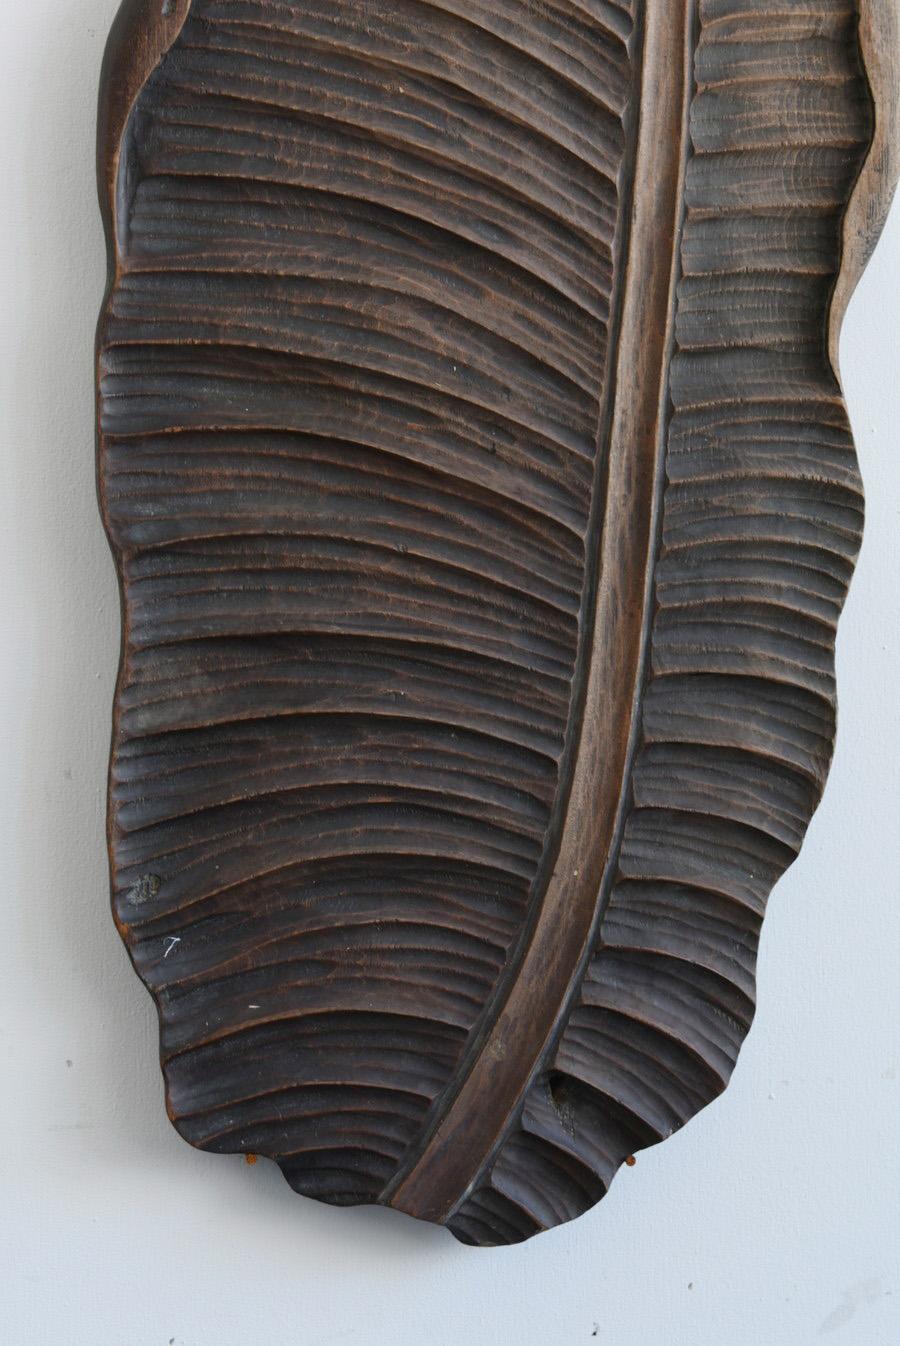 20th Century Japanese Old Wall Hanging Wood Sculpture / Leaf Sculpture / 1900-1920 For Sale